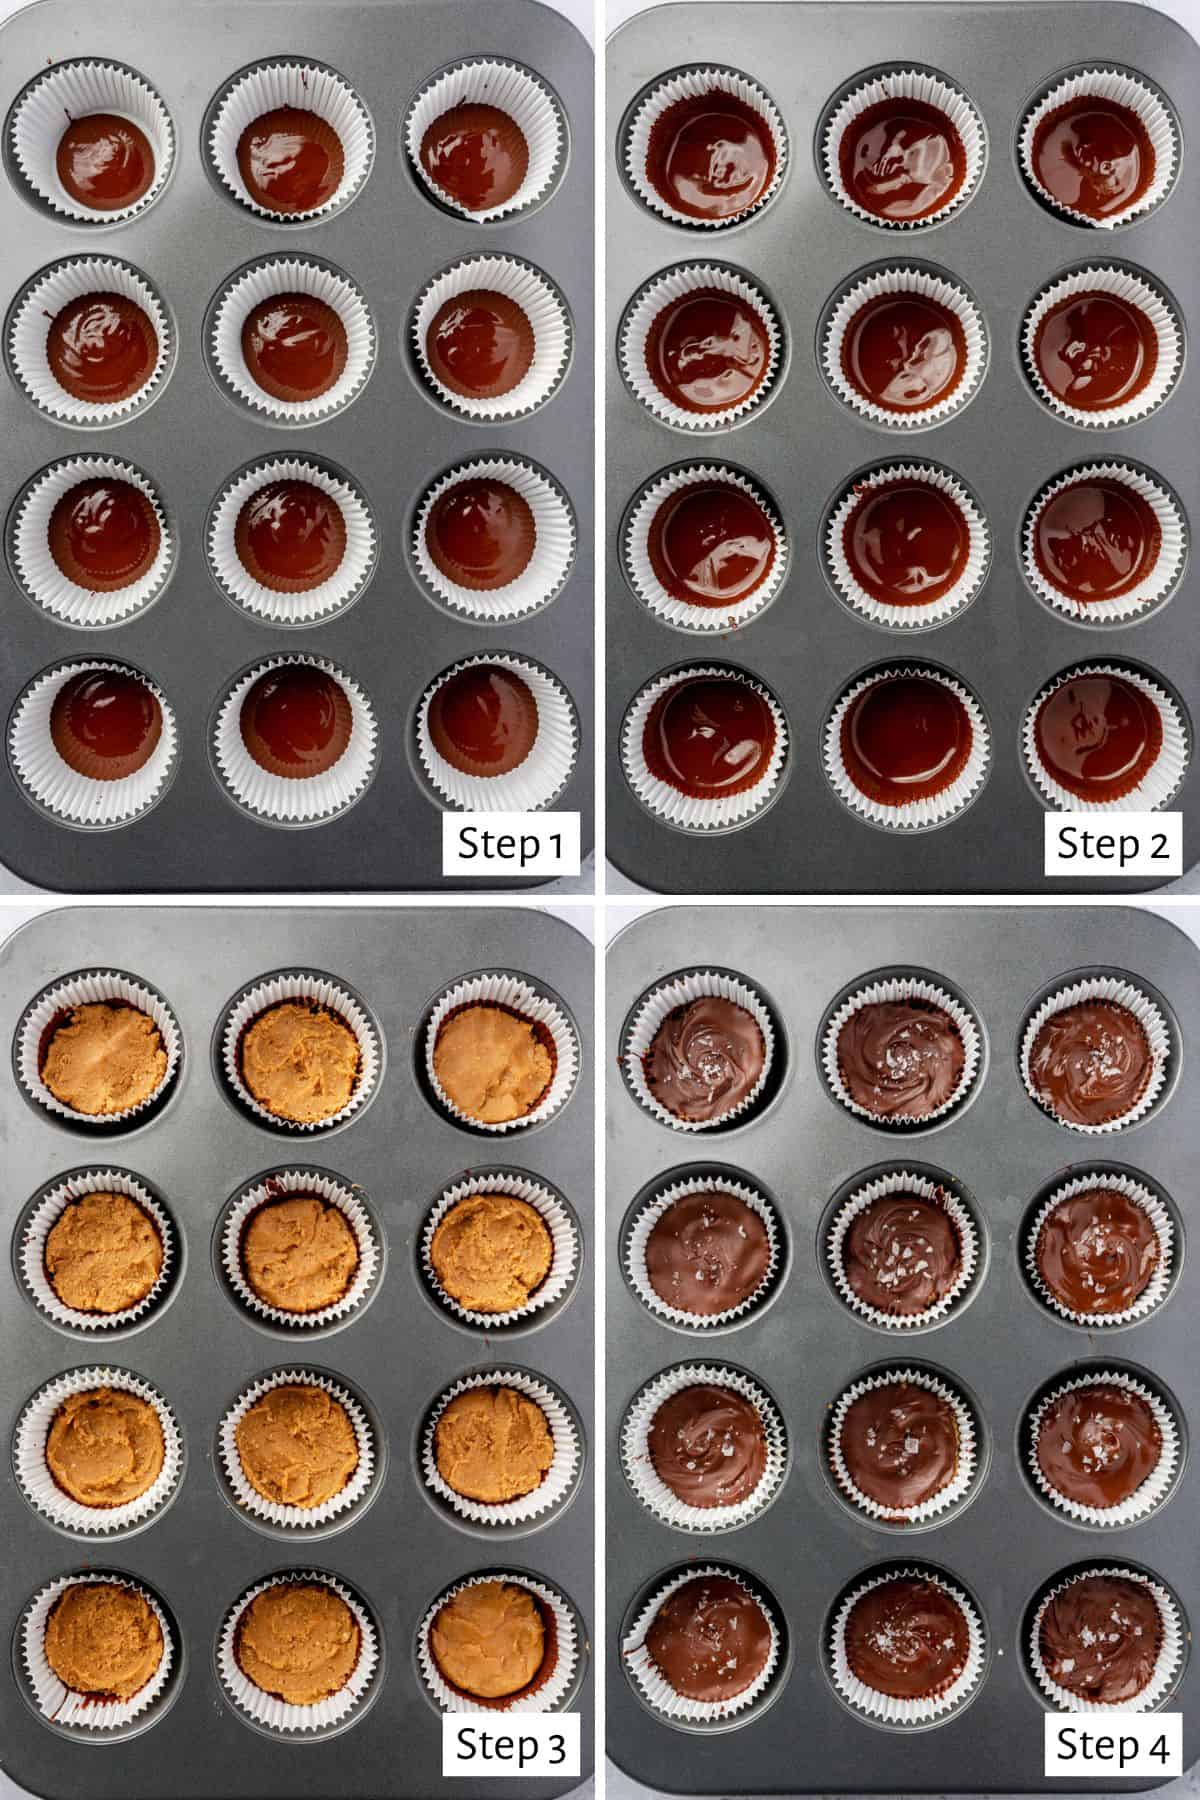 4-image collage of muffin tins: 1 - Chocolate added to paper liners; 2 - Chocolate brushed evenly into paper liners; 3 - Chocolate after peanut butter added and smoothed evenly; 4 - Chocolate added on top before setting.